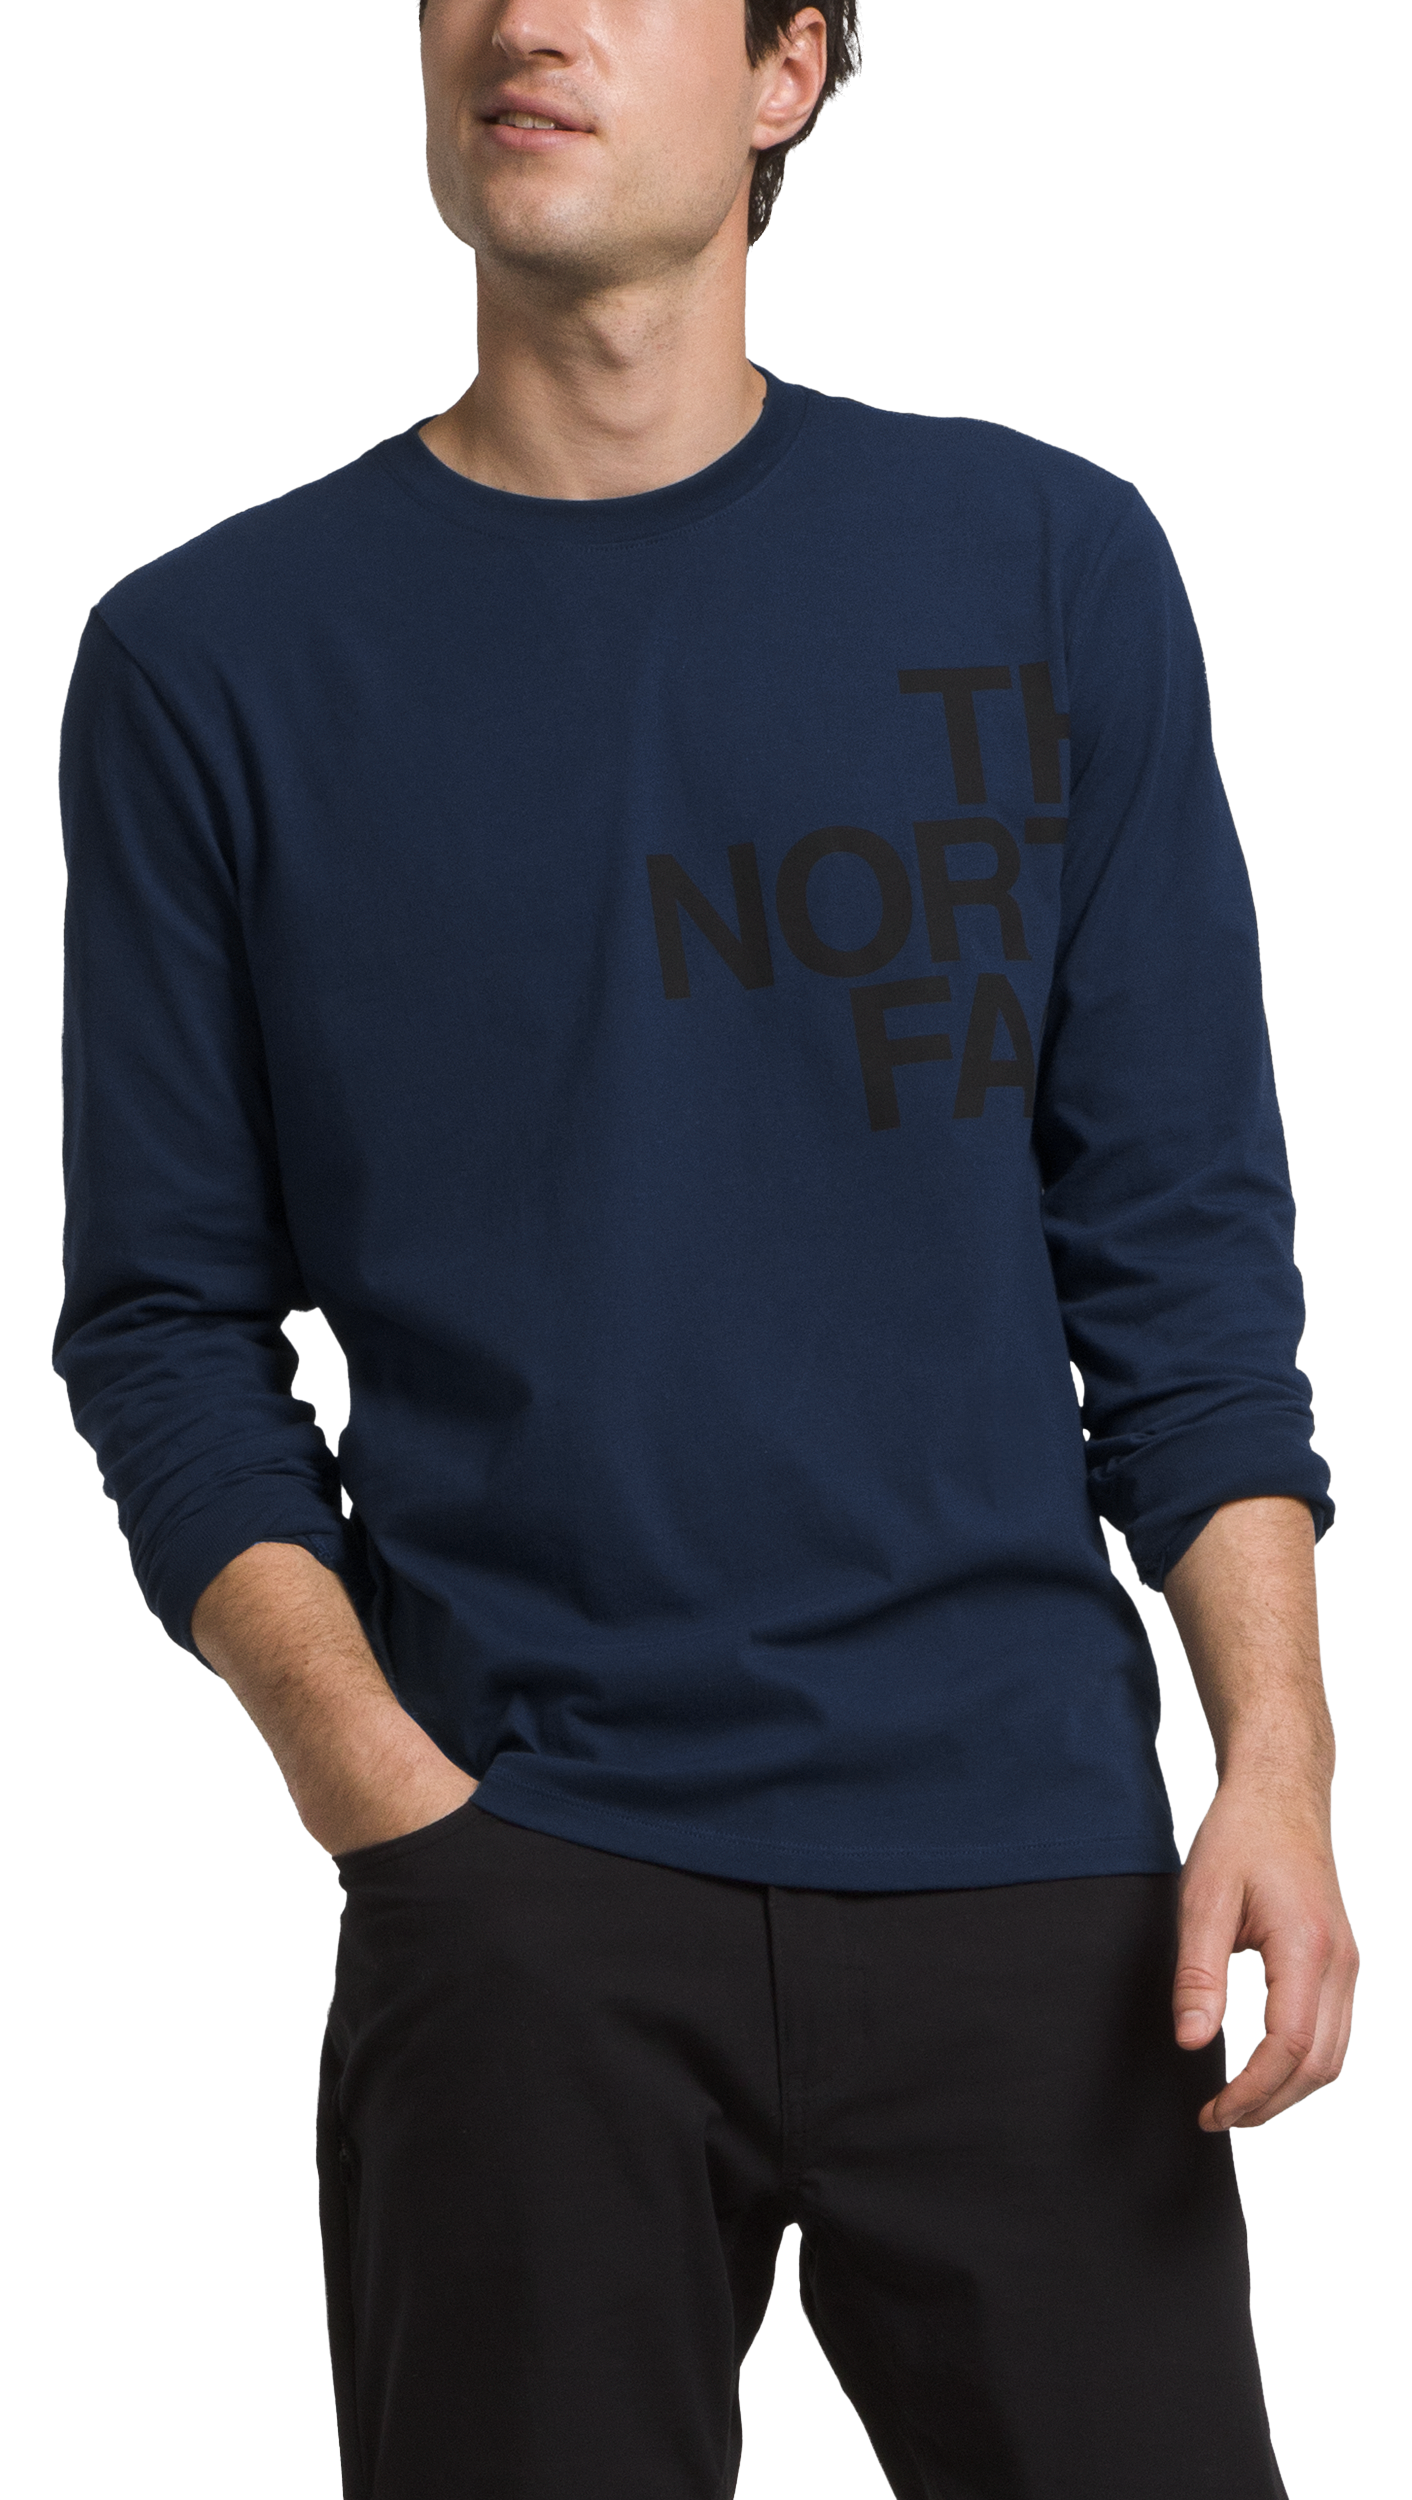 The North Face Brand Proud Long-Sleeve T-Shirt for Men - Summit Navy/TNF Black - S